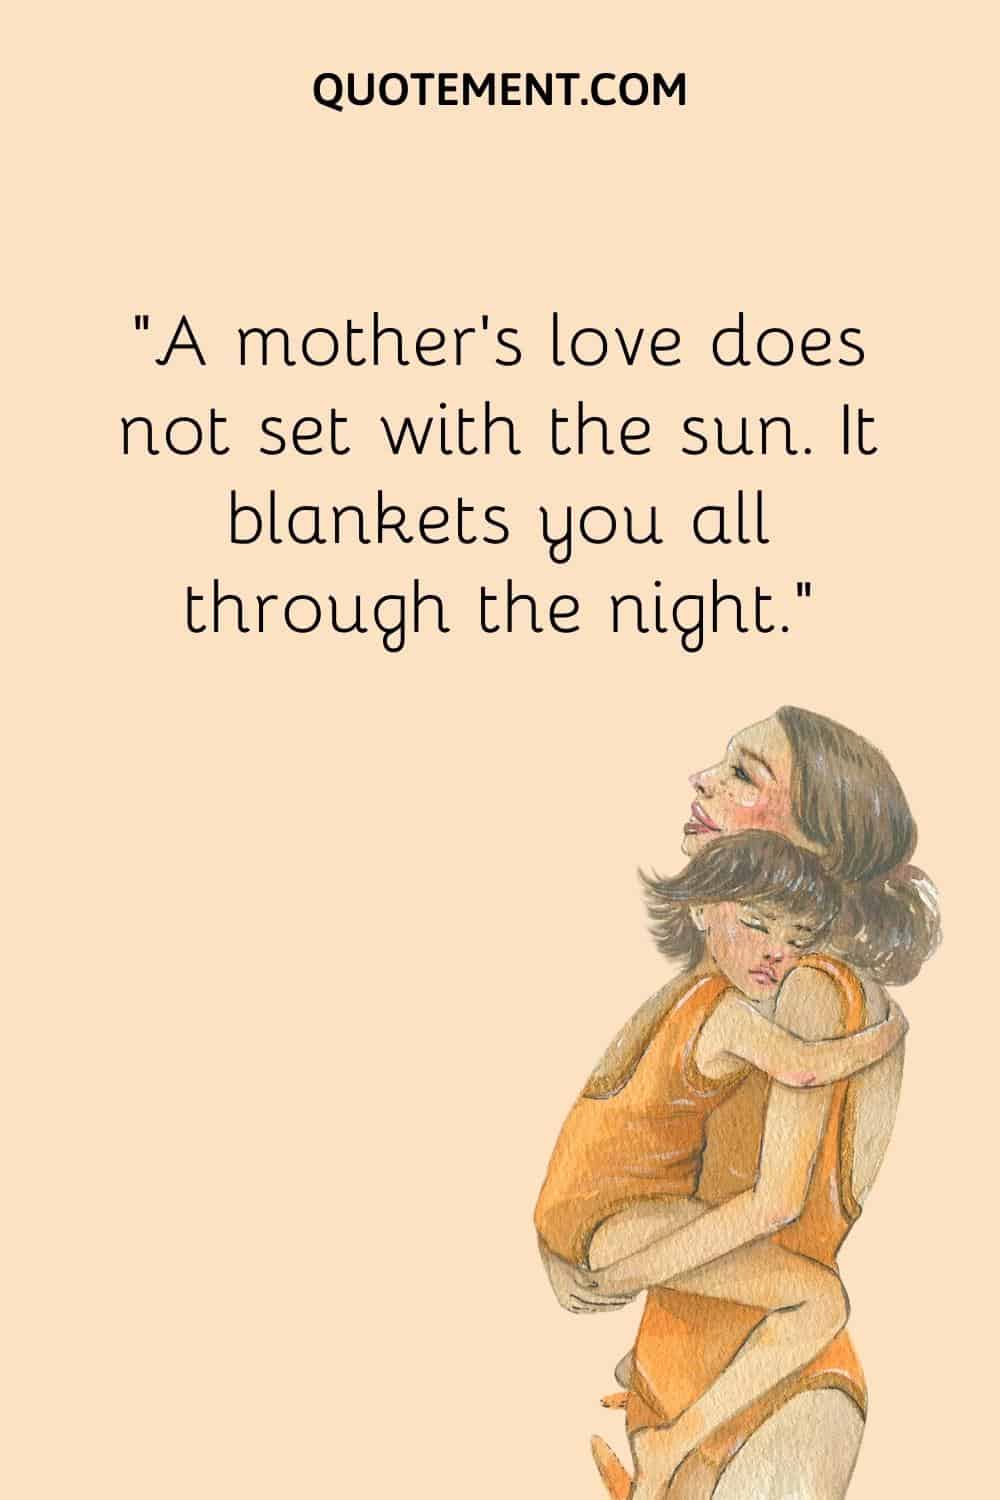 A mother's love does not set with the sun. It blankets you all through the night.